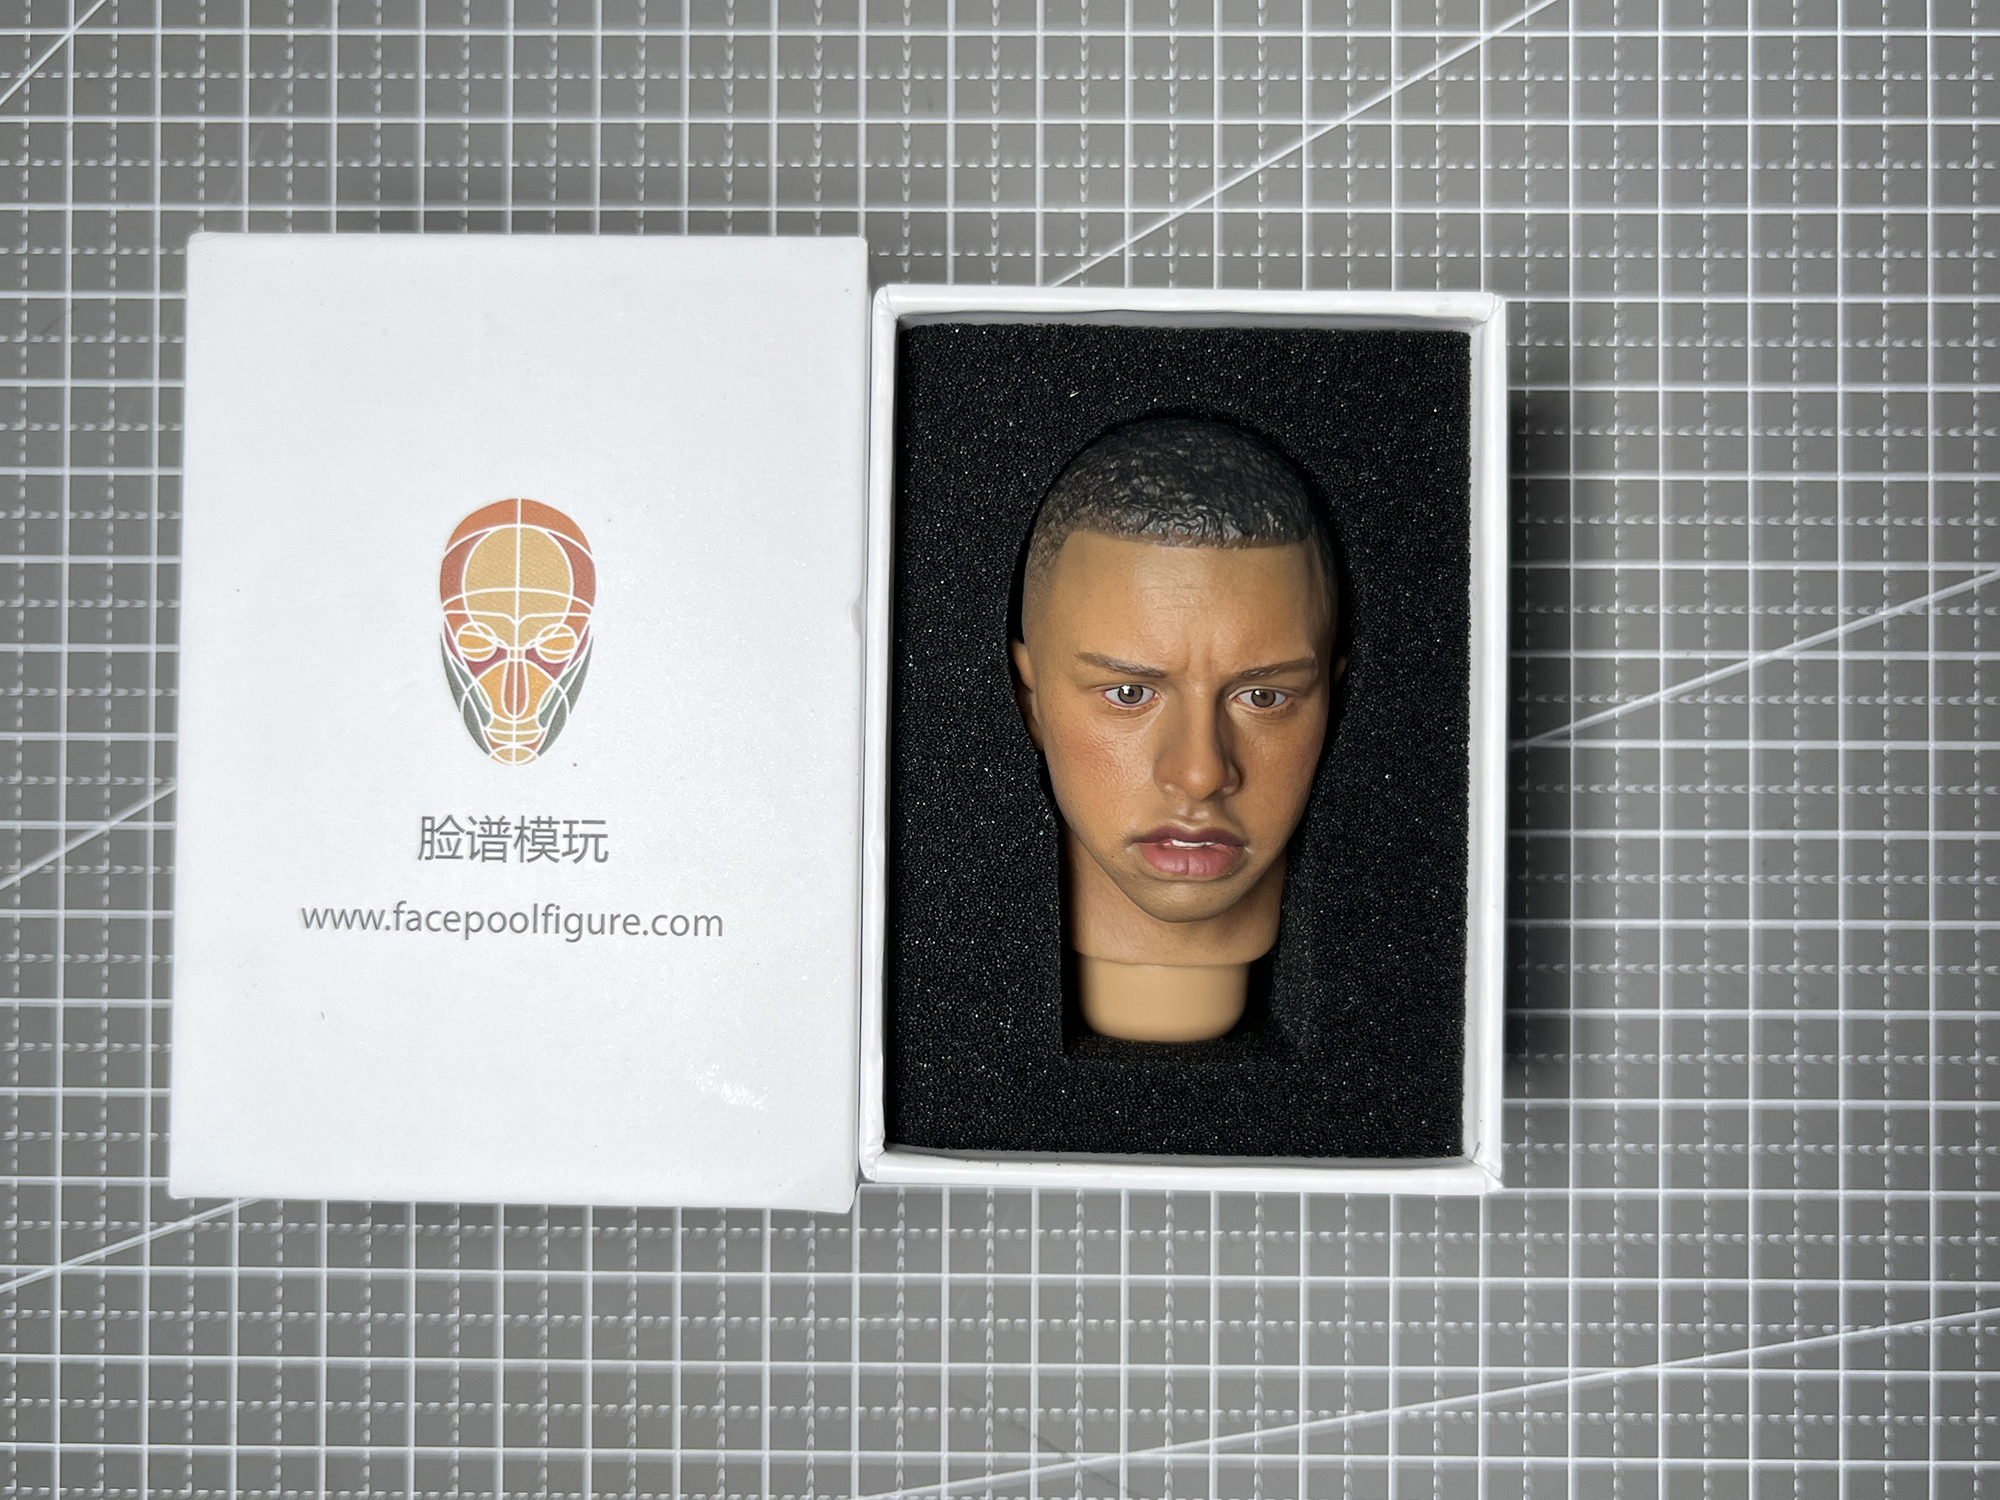 Black Head FP-S-002 – Sculpt Facepoolfigure FacepoolFigure Male Store Online 1/6 with Expression